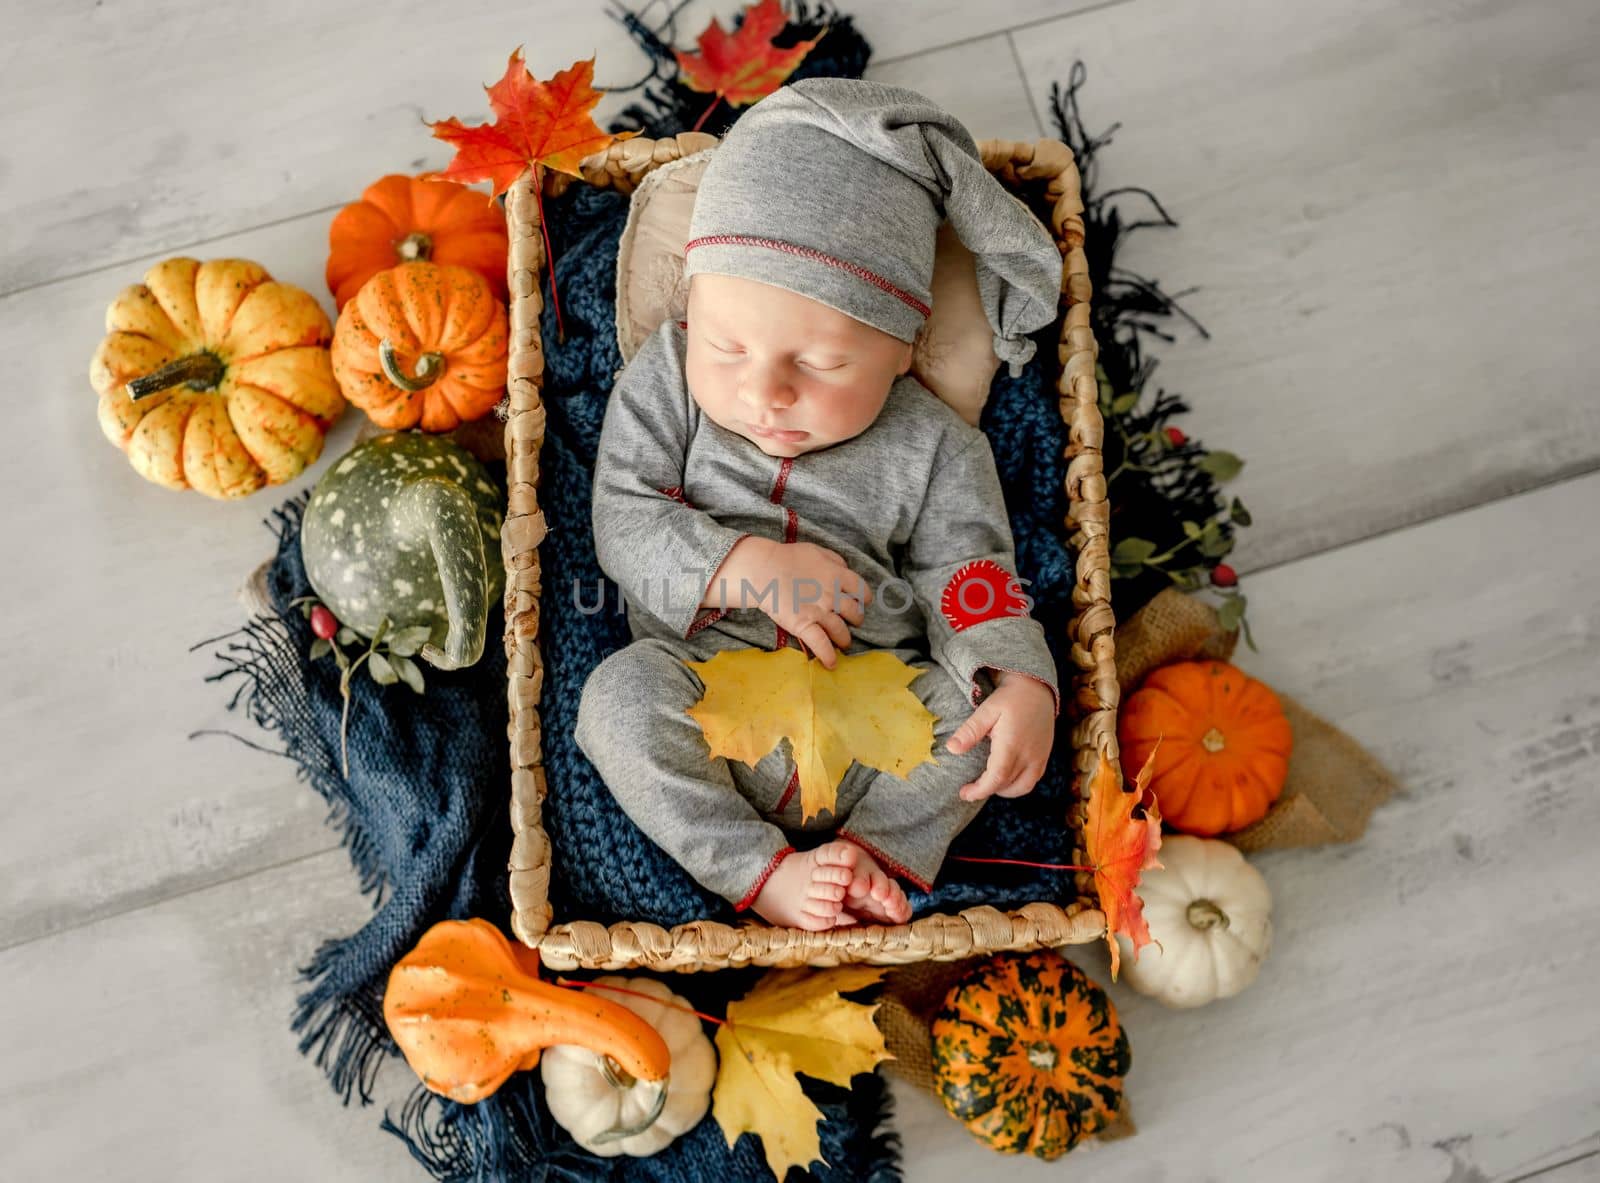 Newborn baby boy swaddled in fabric sleeping with knitted pumpkin toy and decoration. Adorable infant child kid studio halloween portrait